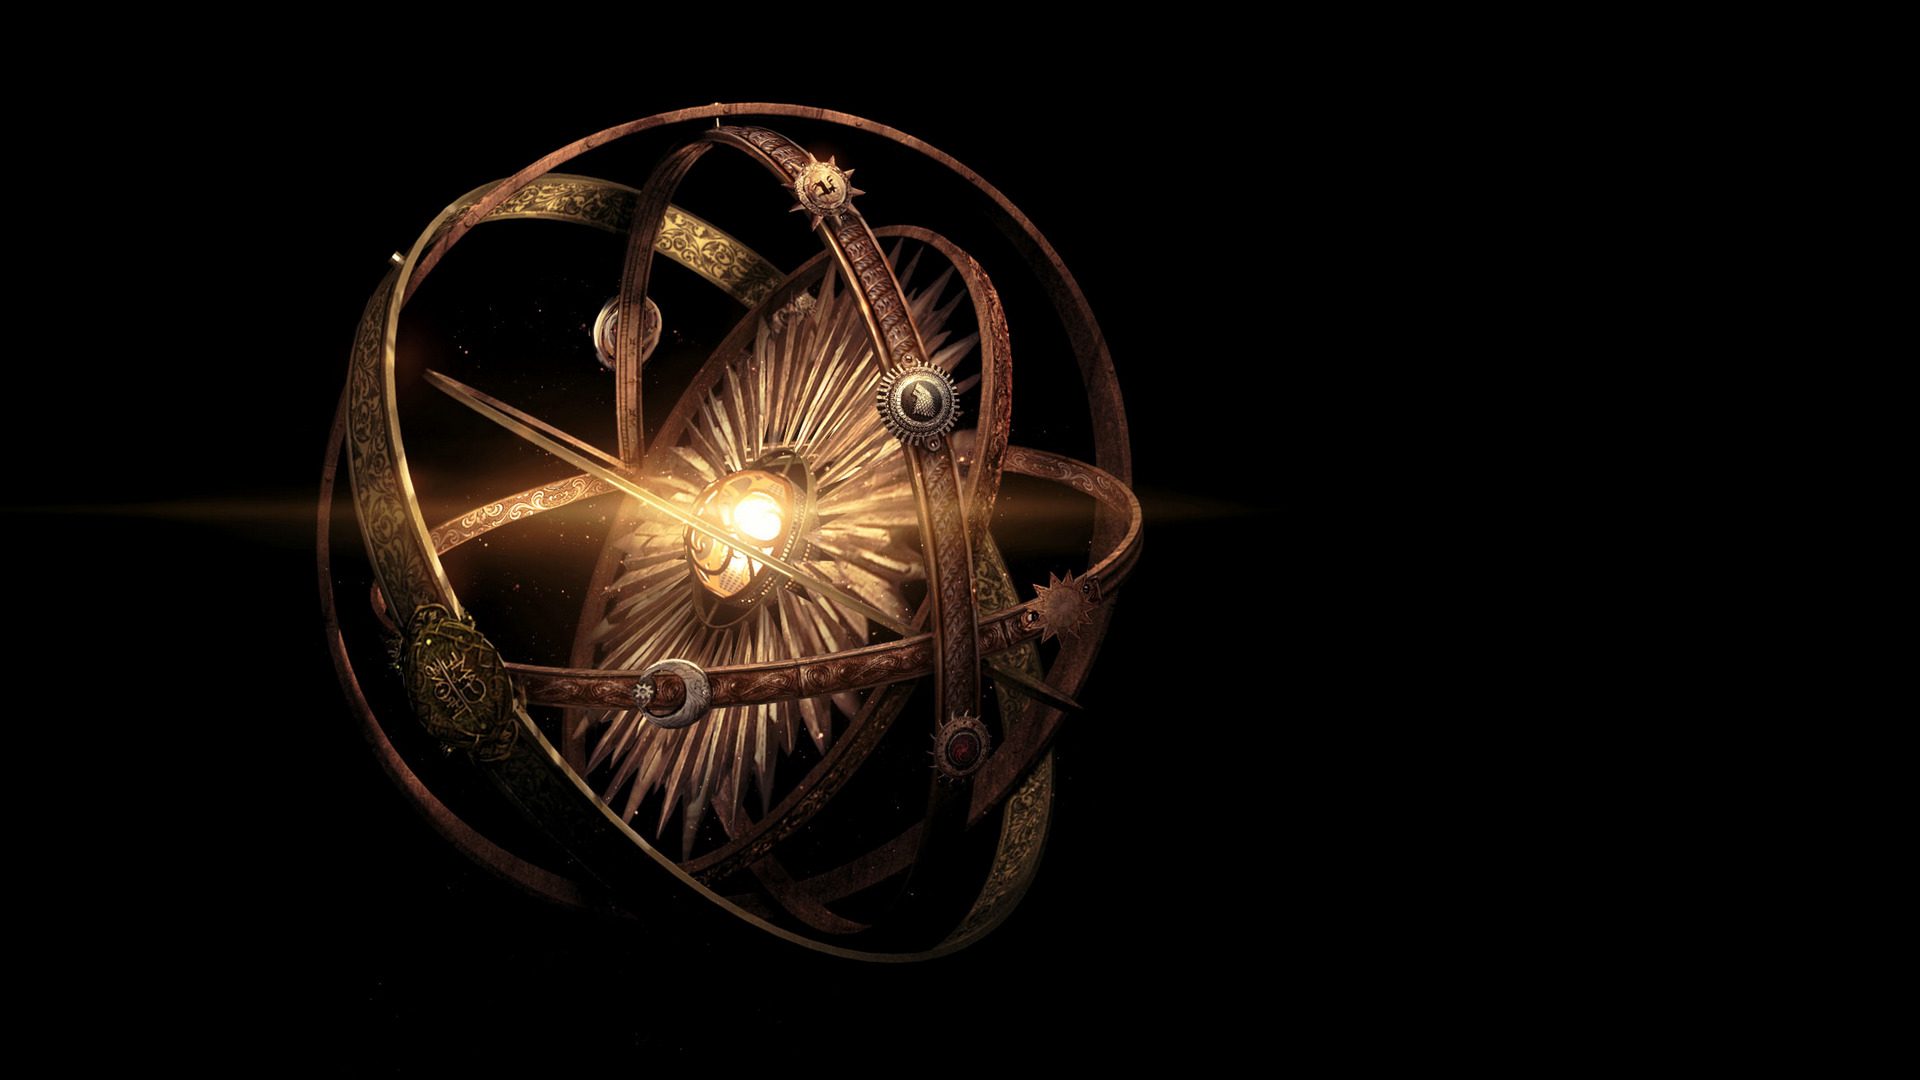 game of thrones hd wallpapers for mobile,light,darkness,fractal art,still life photography,circle